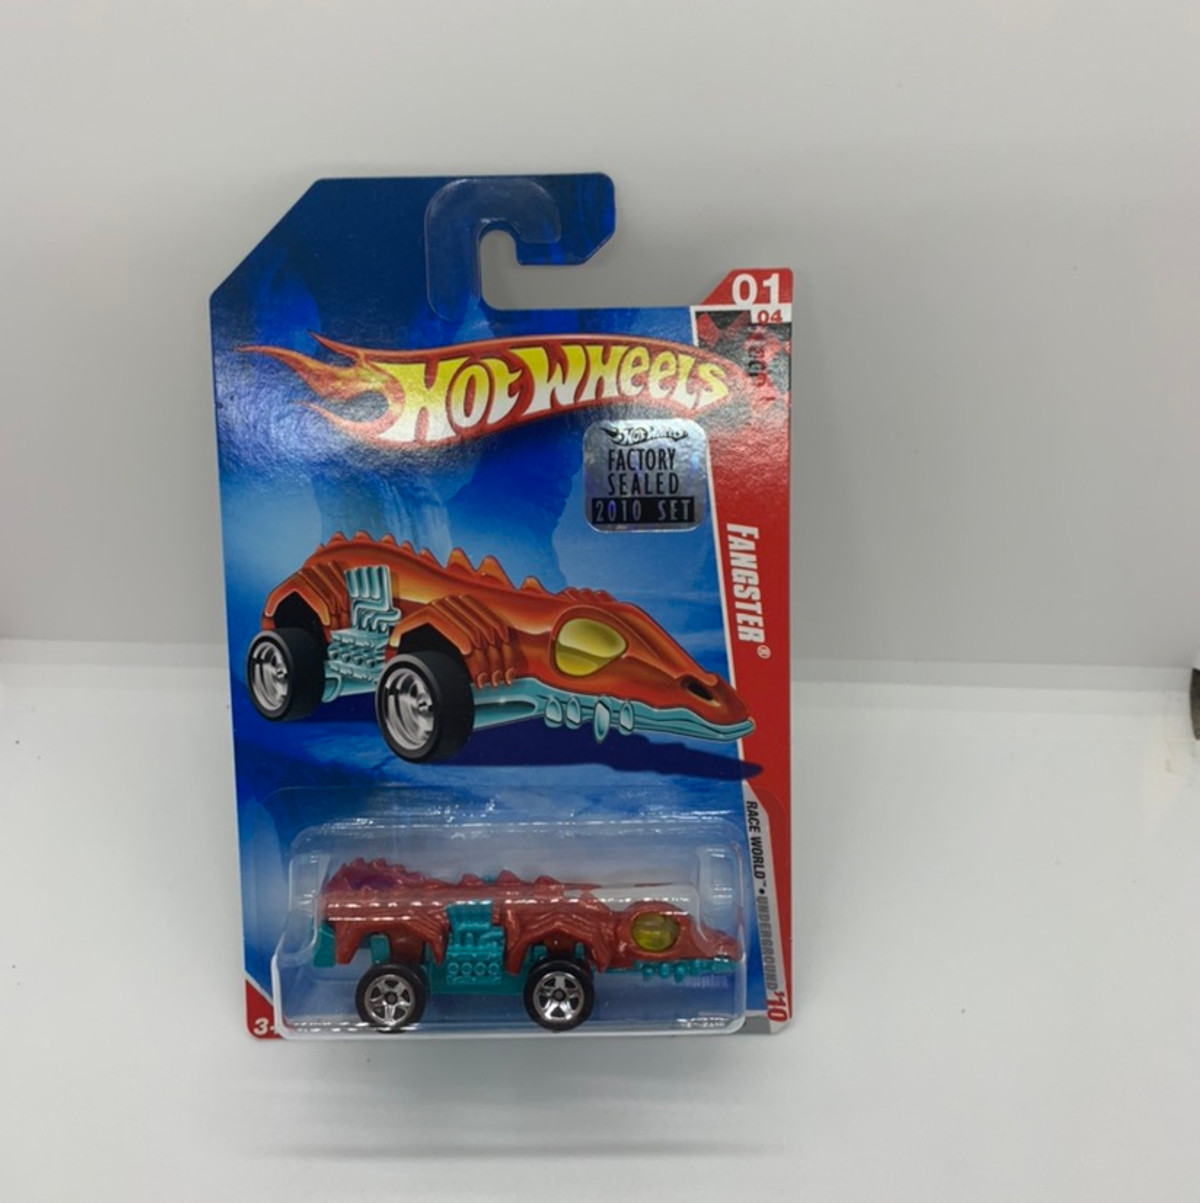 2010 Hot wheels Fangster With Factory Set Sticker 